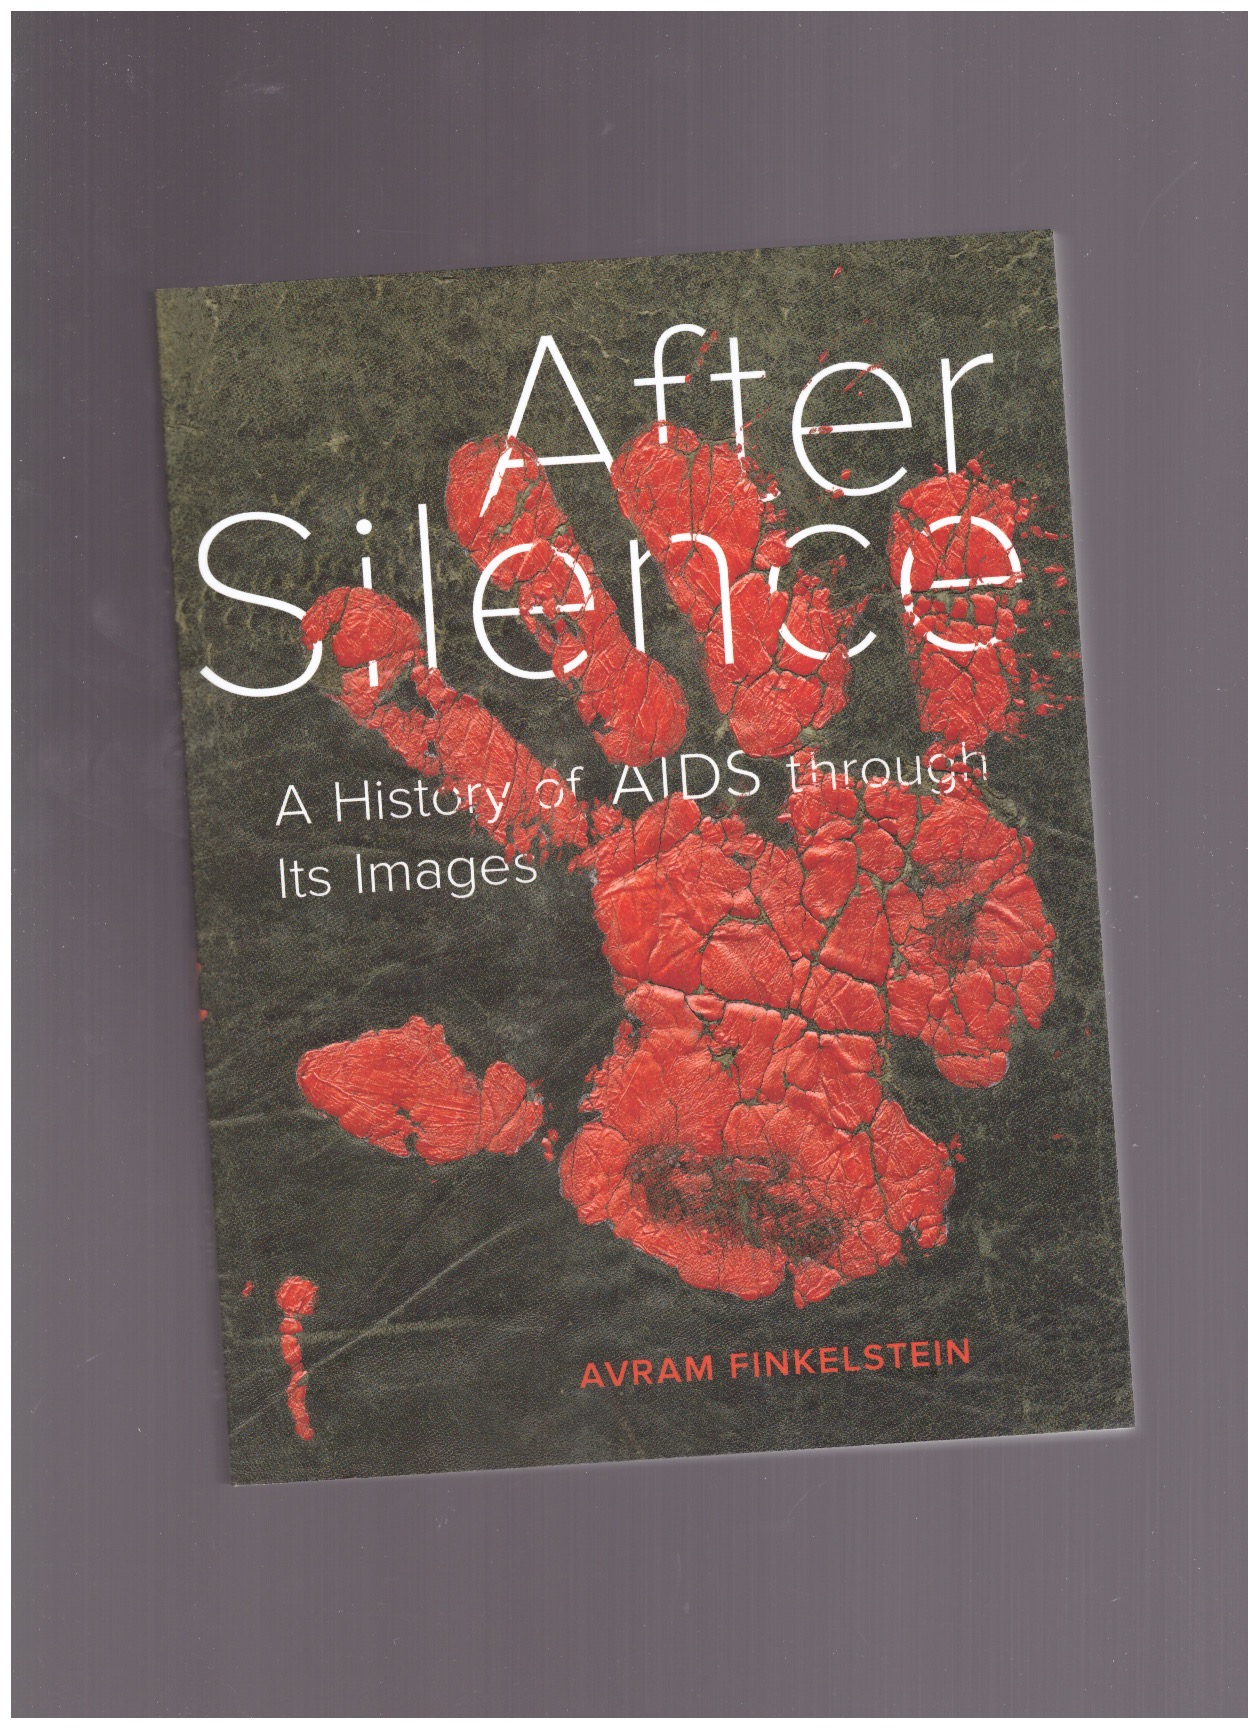 FINKELSTEIN, Avram - After Silence. A History of AIDS through Its Images